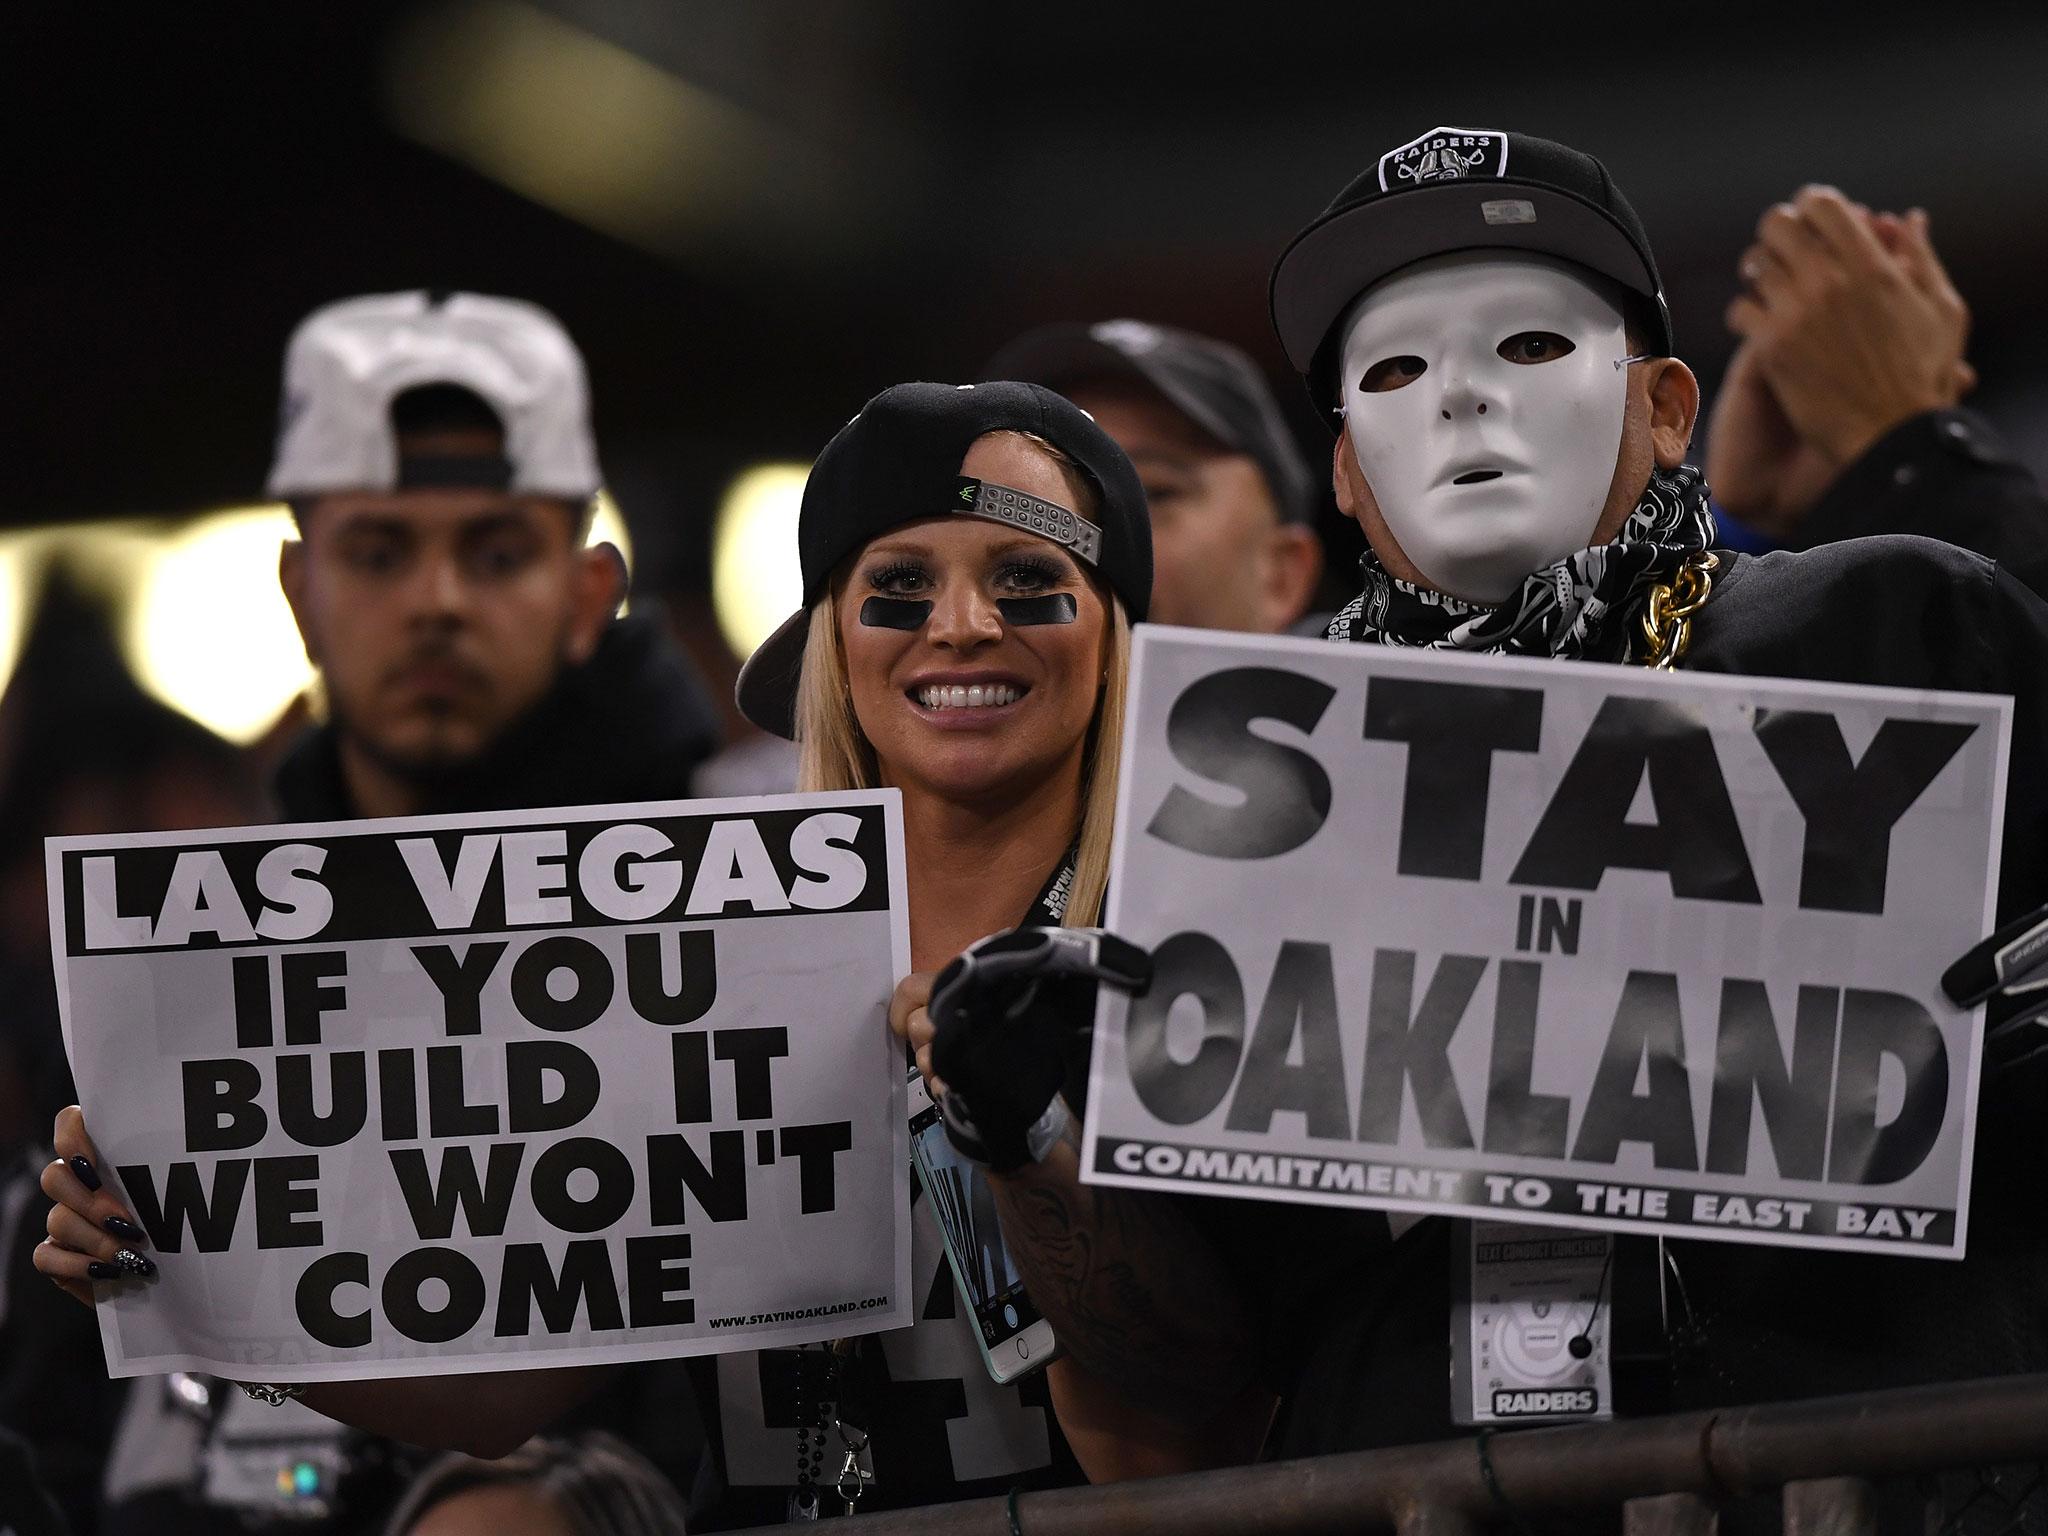 The move is not a popular one with Raiders fans